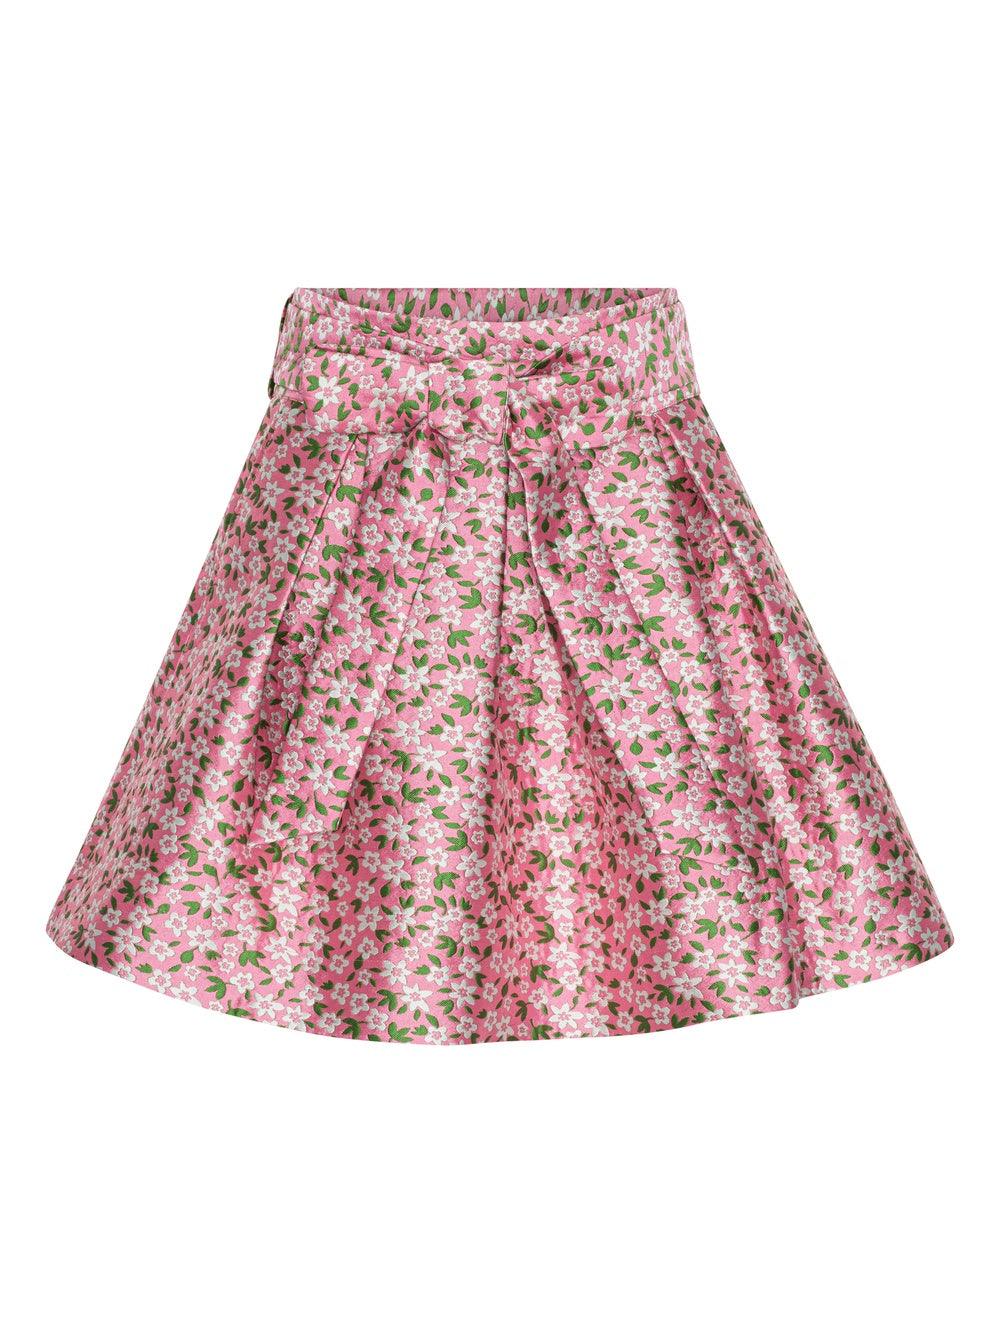 custommade - Rosabel Jacquard Pink Pleated Skirt - 32 The Guild